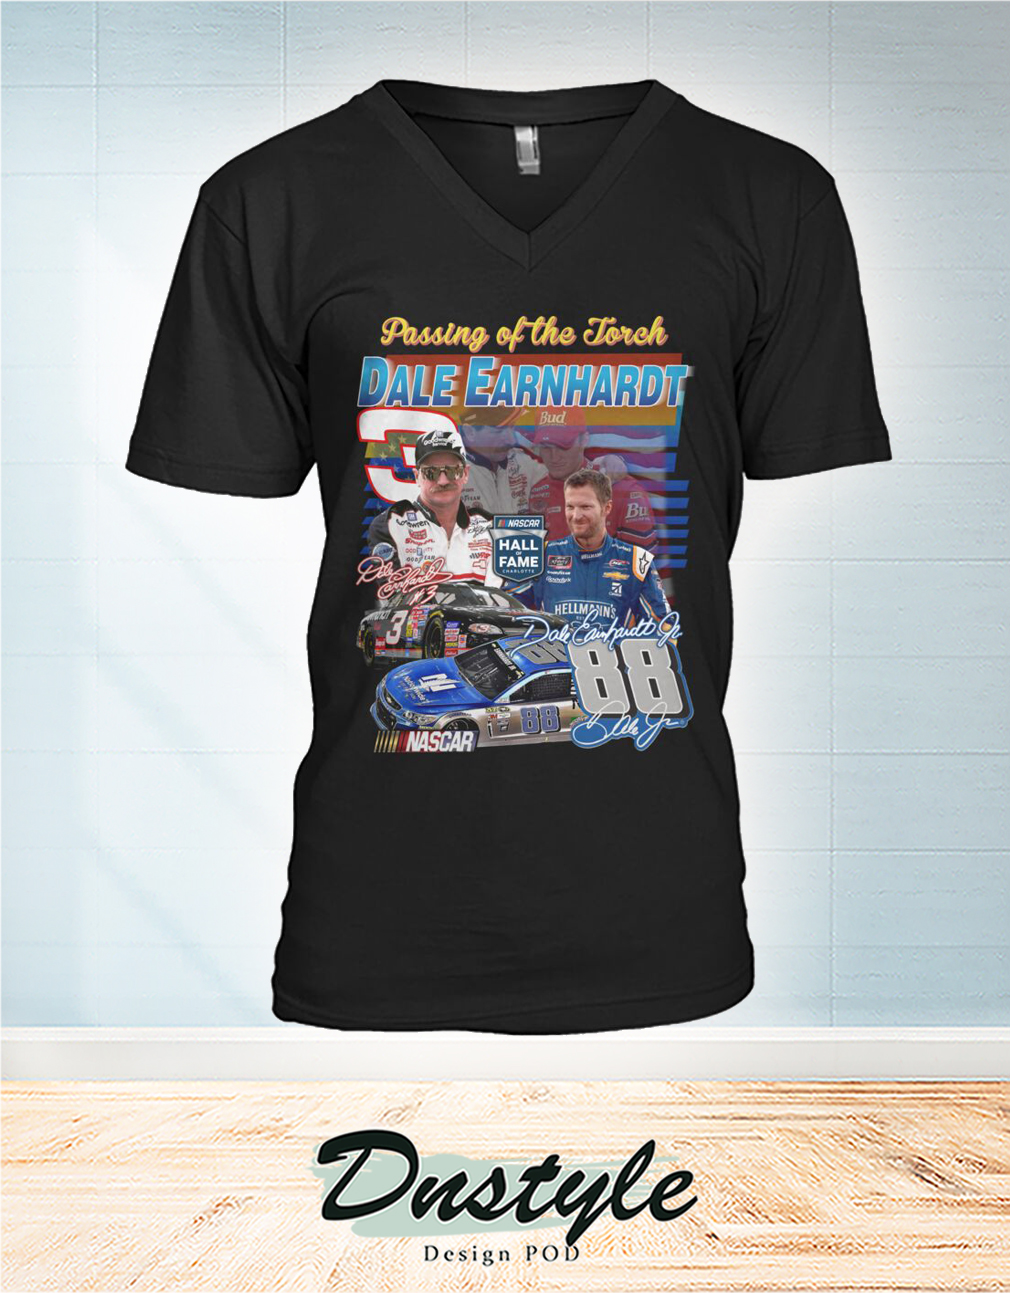 Passing of the forch Dale Earnhardt signature v-neck